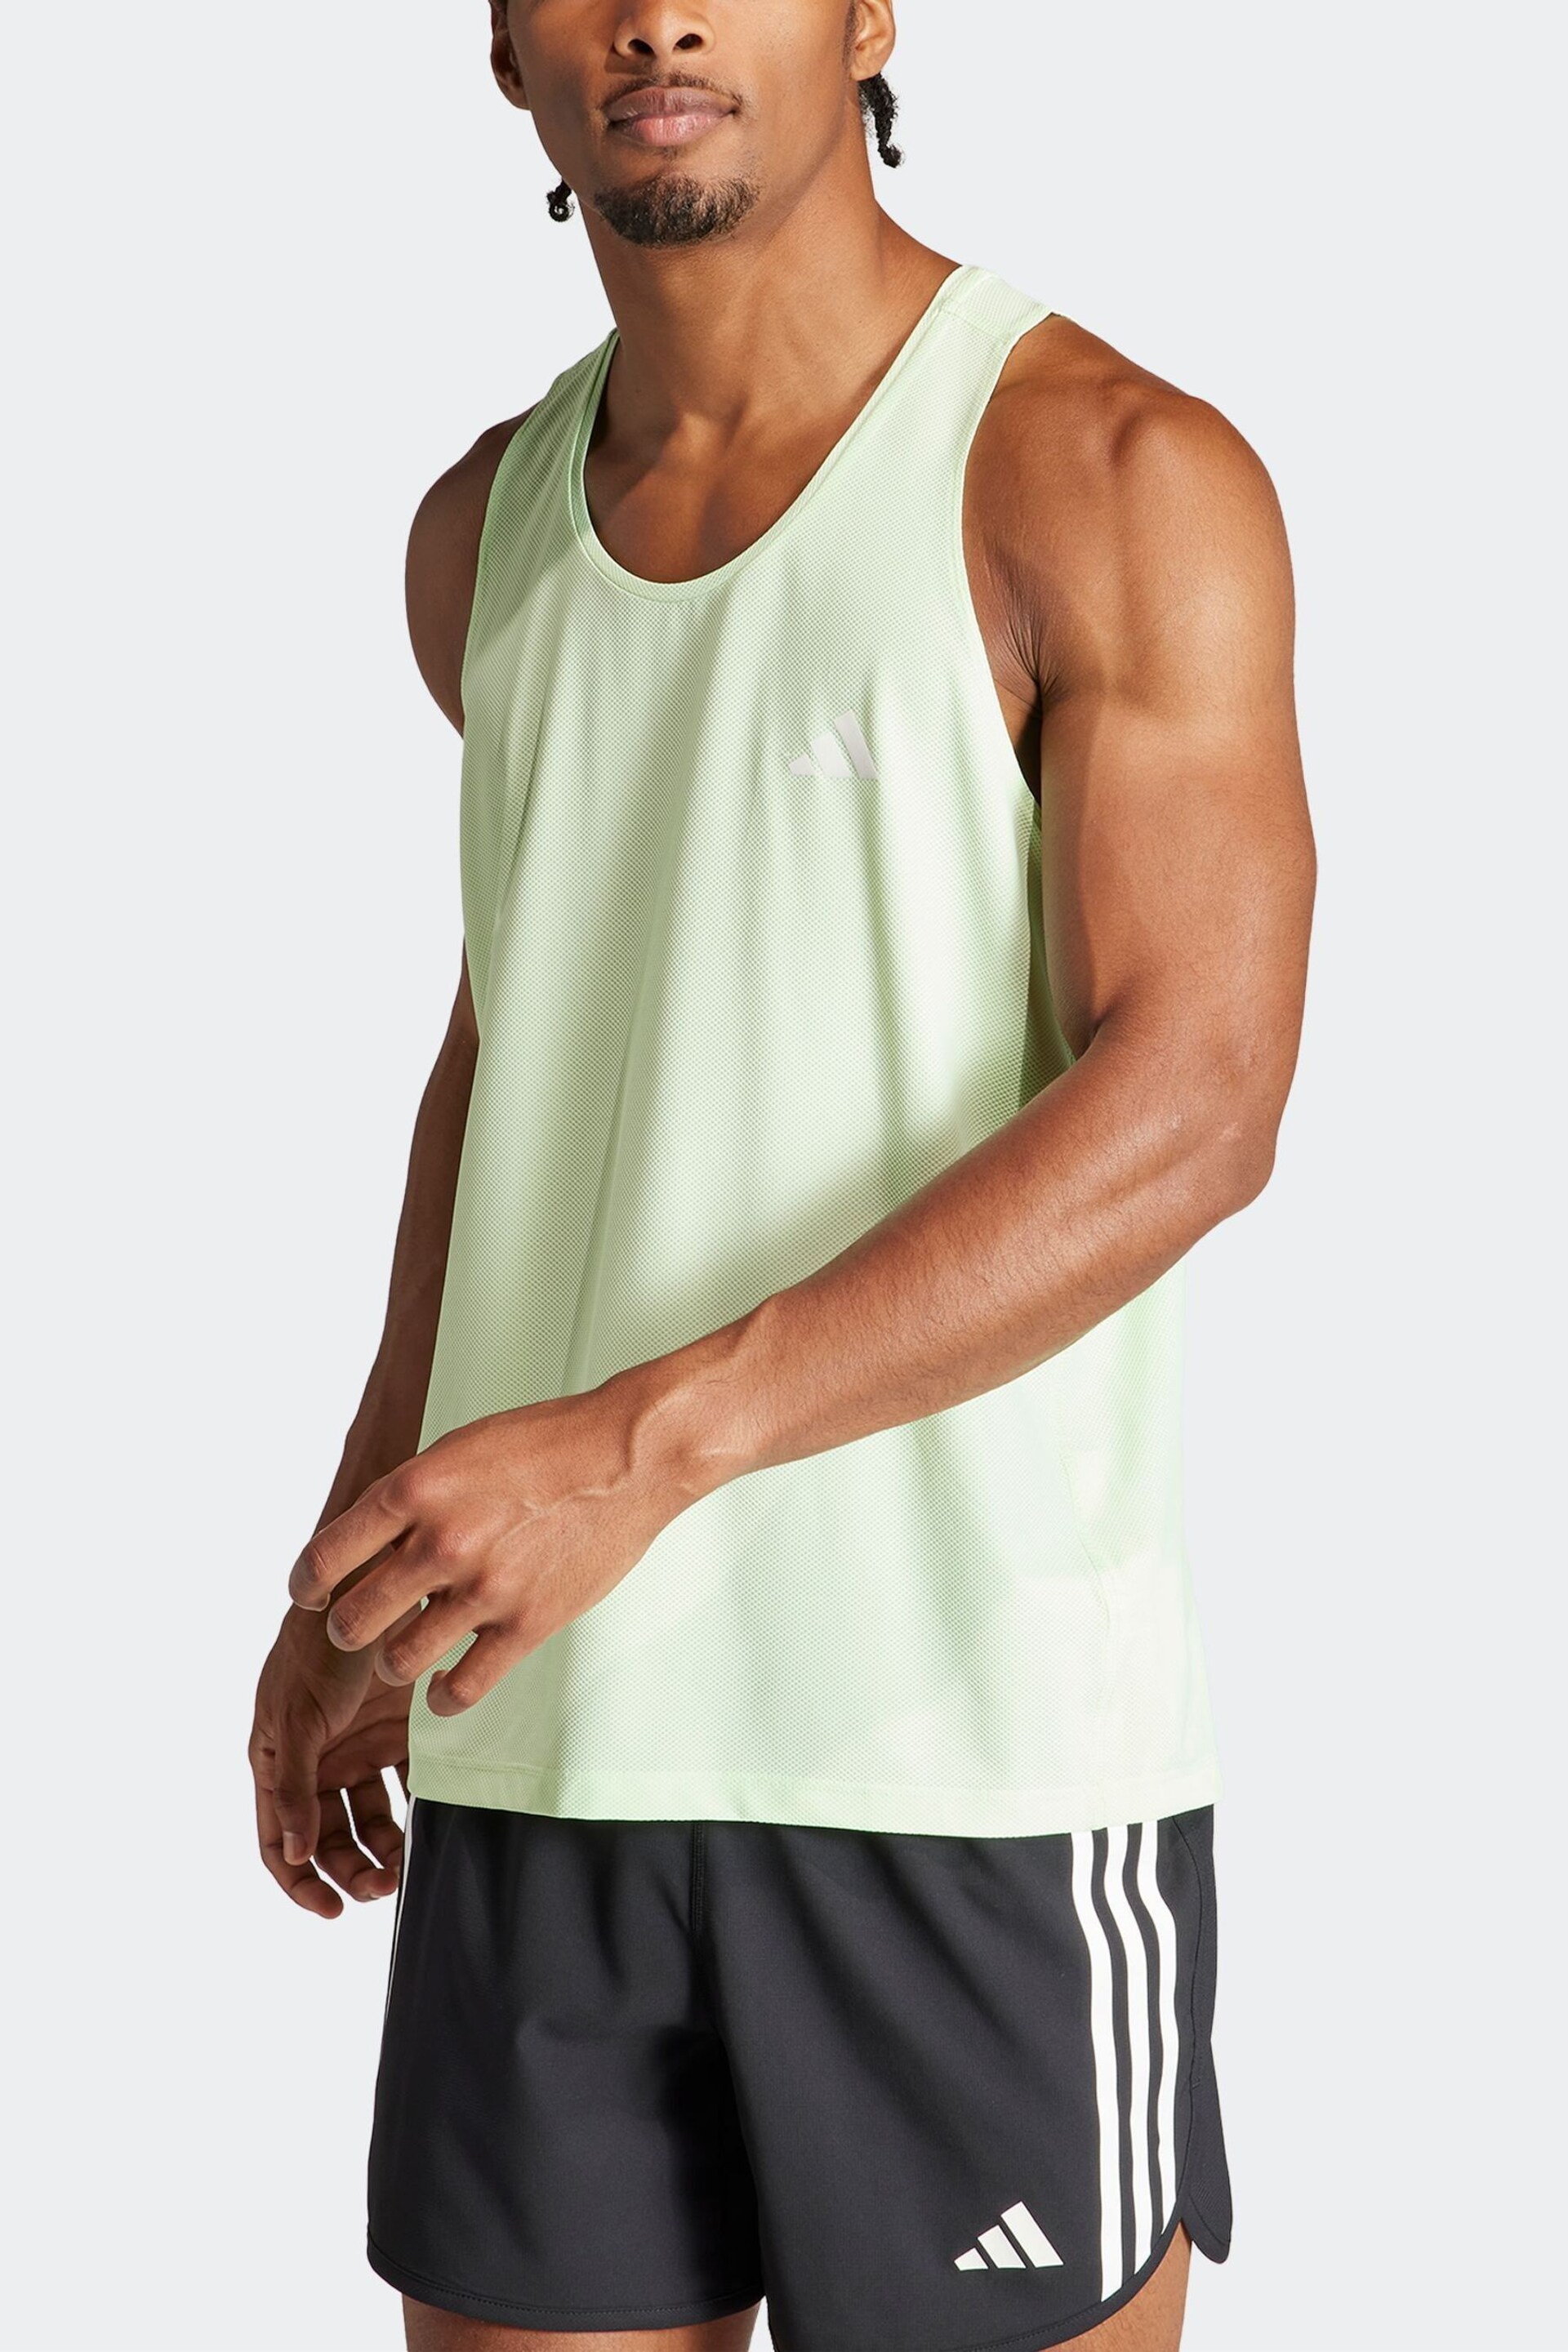 adidas Green Own The Run Vest - Image 3 of 7